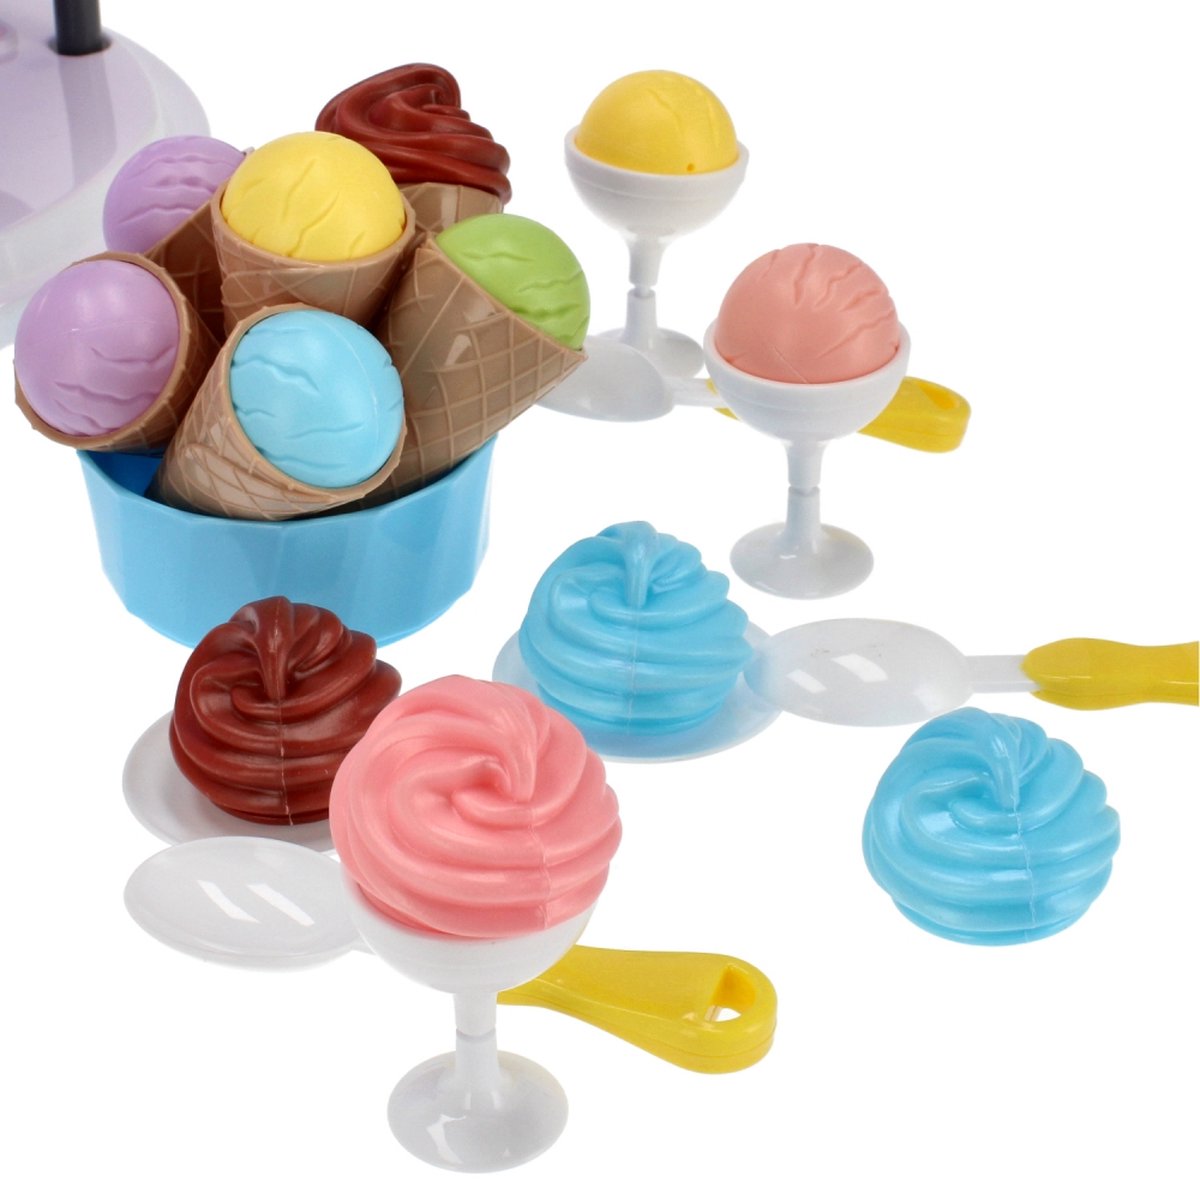 <tc>Ariko</tc>  Toy Suitcase Ice cream shop trolley shop 68 pieces - Soft ice cream, Italian ice cream, crockery, cone and much more - handy take-along suitcase